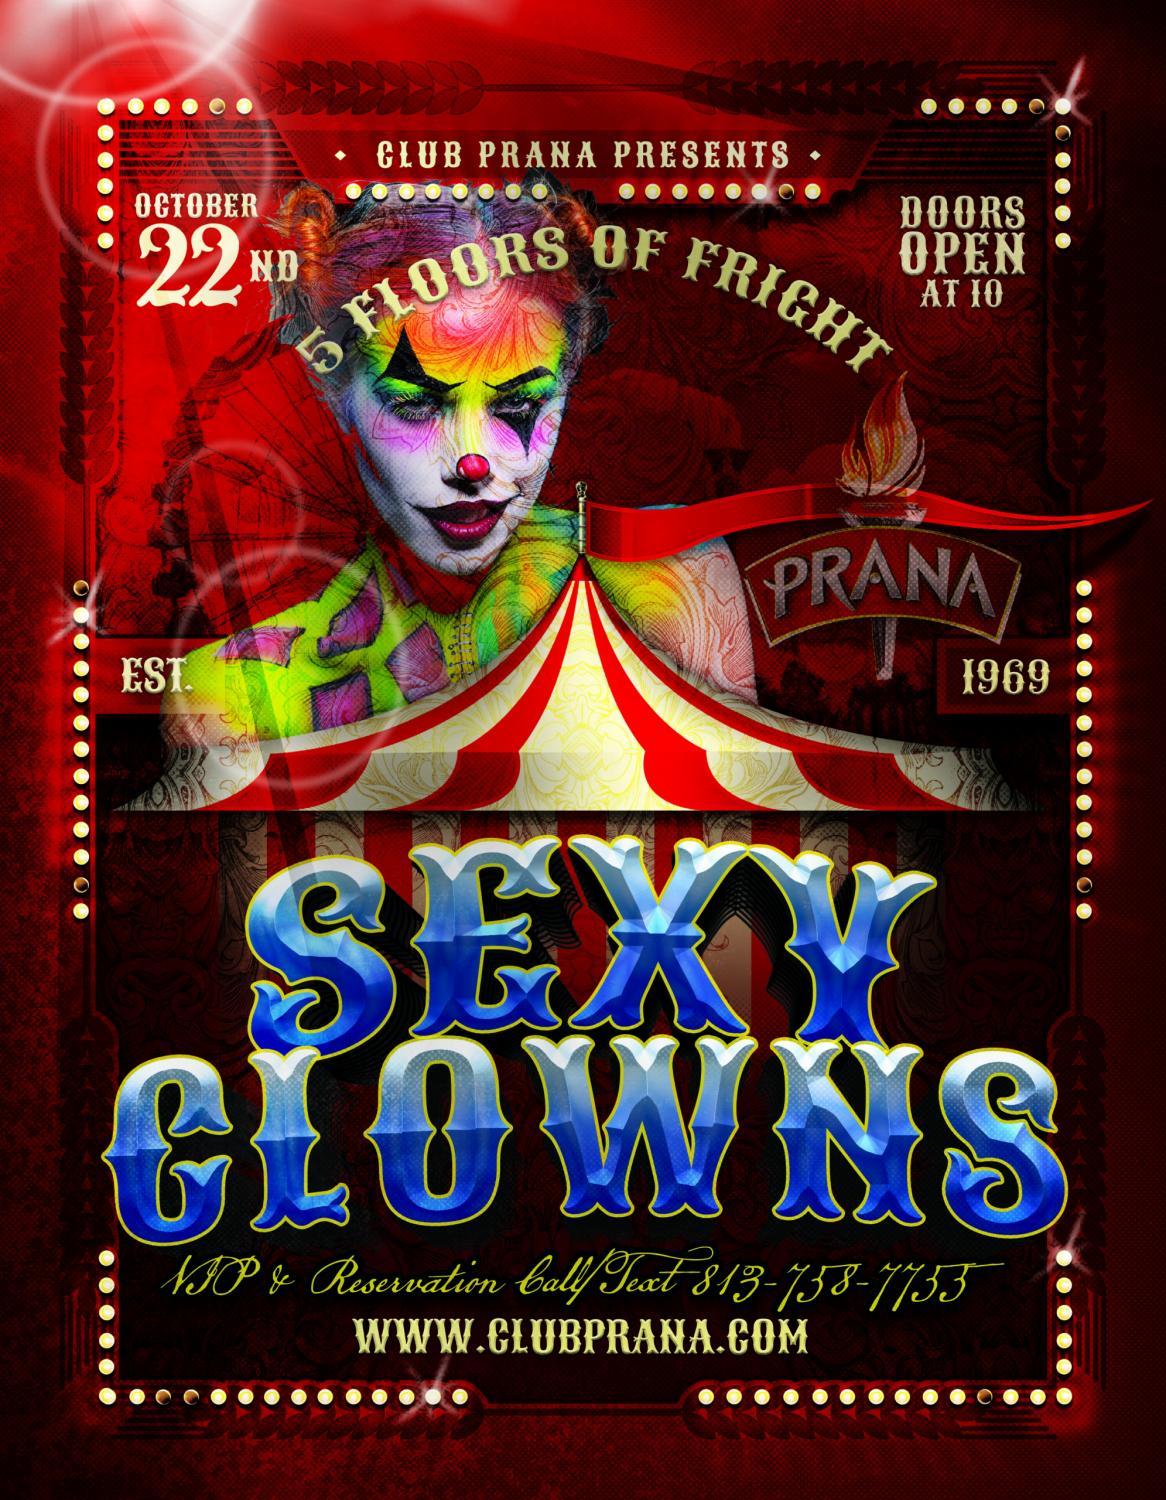 Halloween Sexy Party at Club Prana
Sat Oct 22, 10:00 PM - Sat Oct 22, 12:00 AM
in 3 days